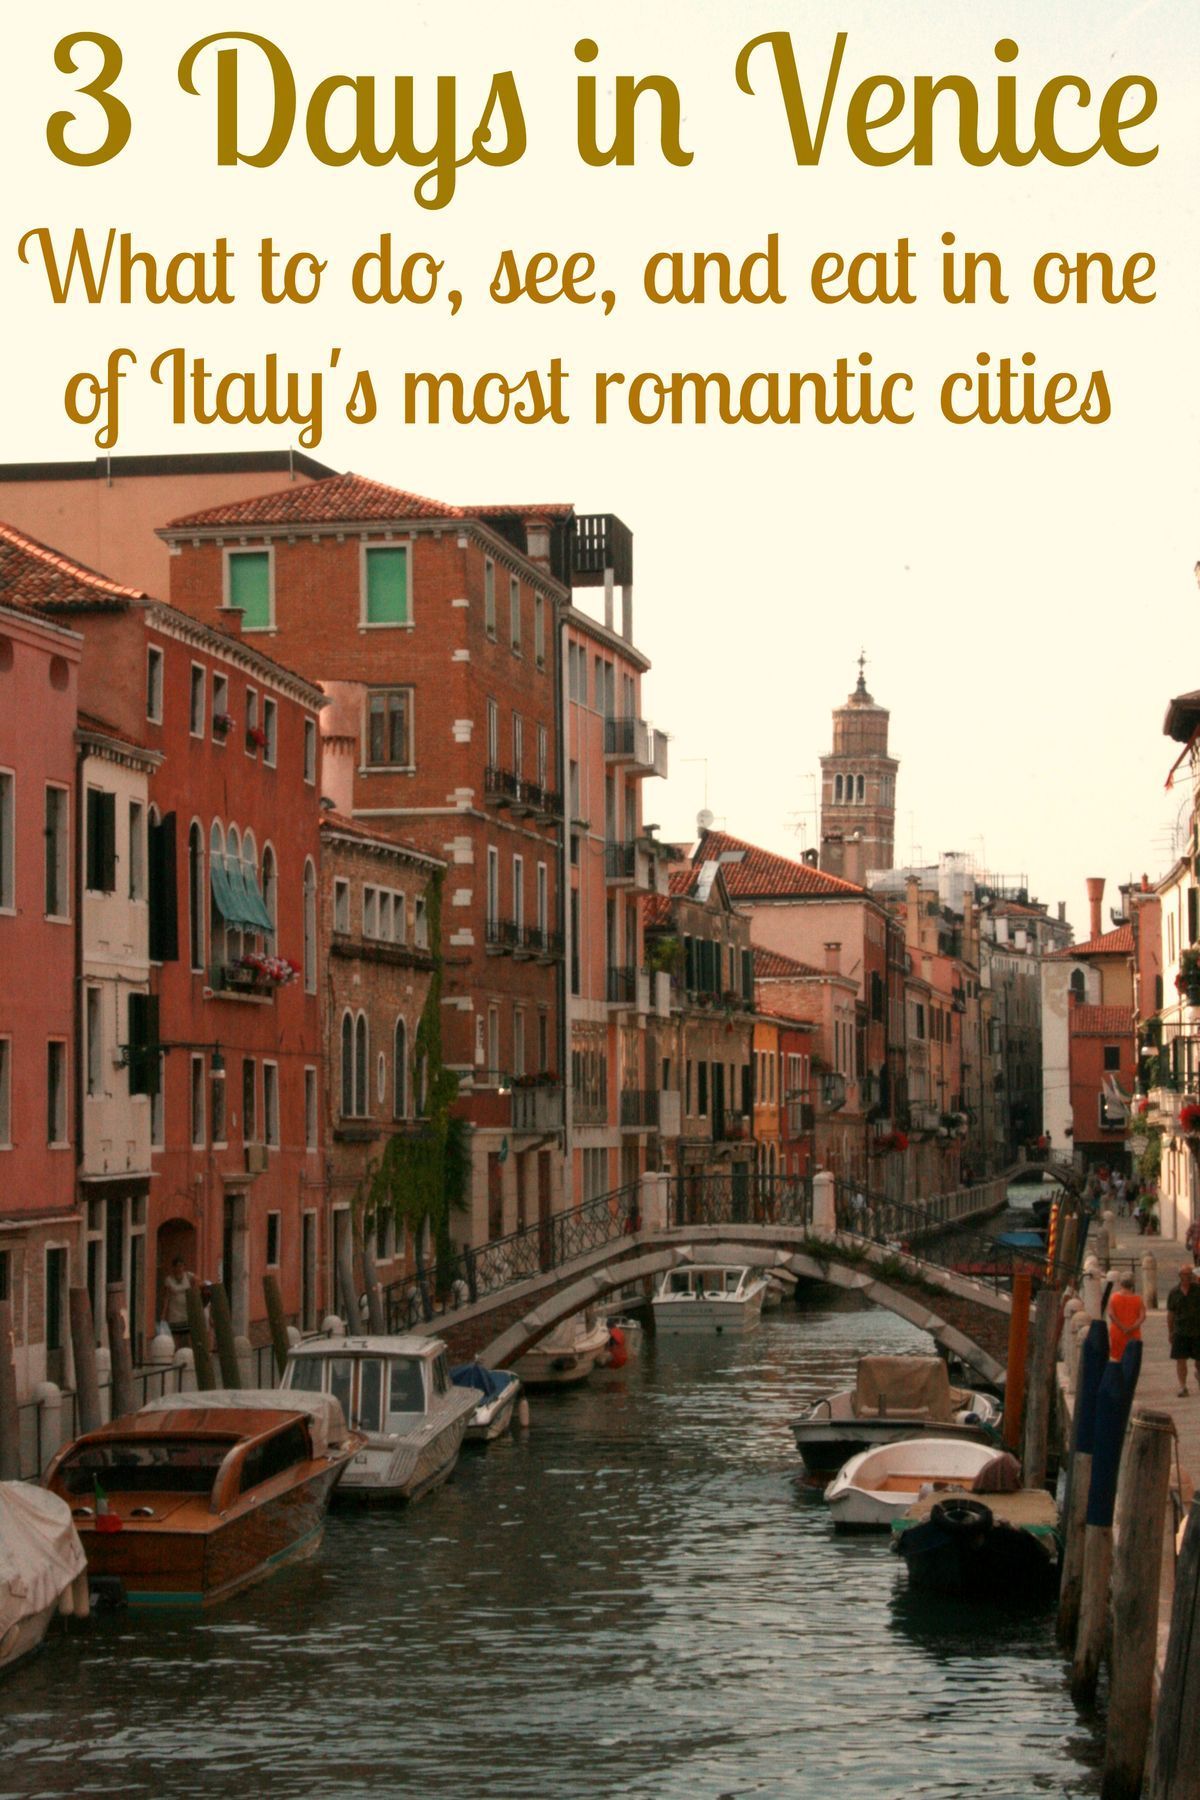 What to do, see, and eat in Venice, with limited time in one of Italy's most romantic cities! -   24 3 day list
 ideas